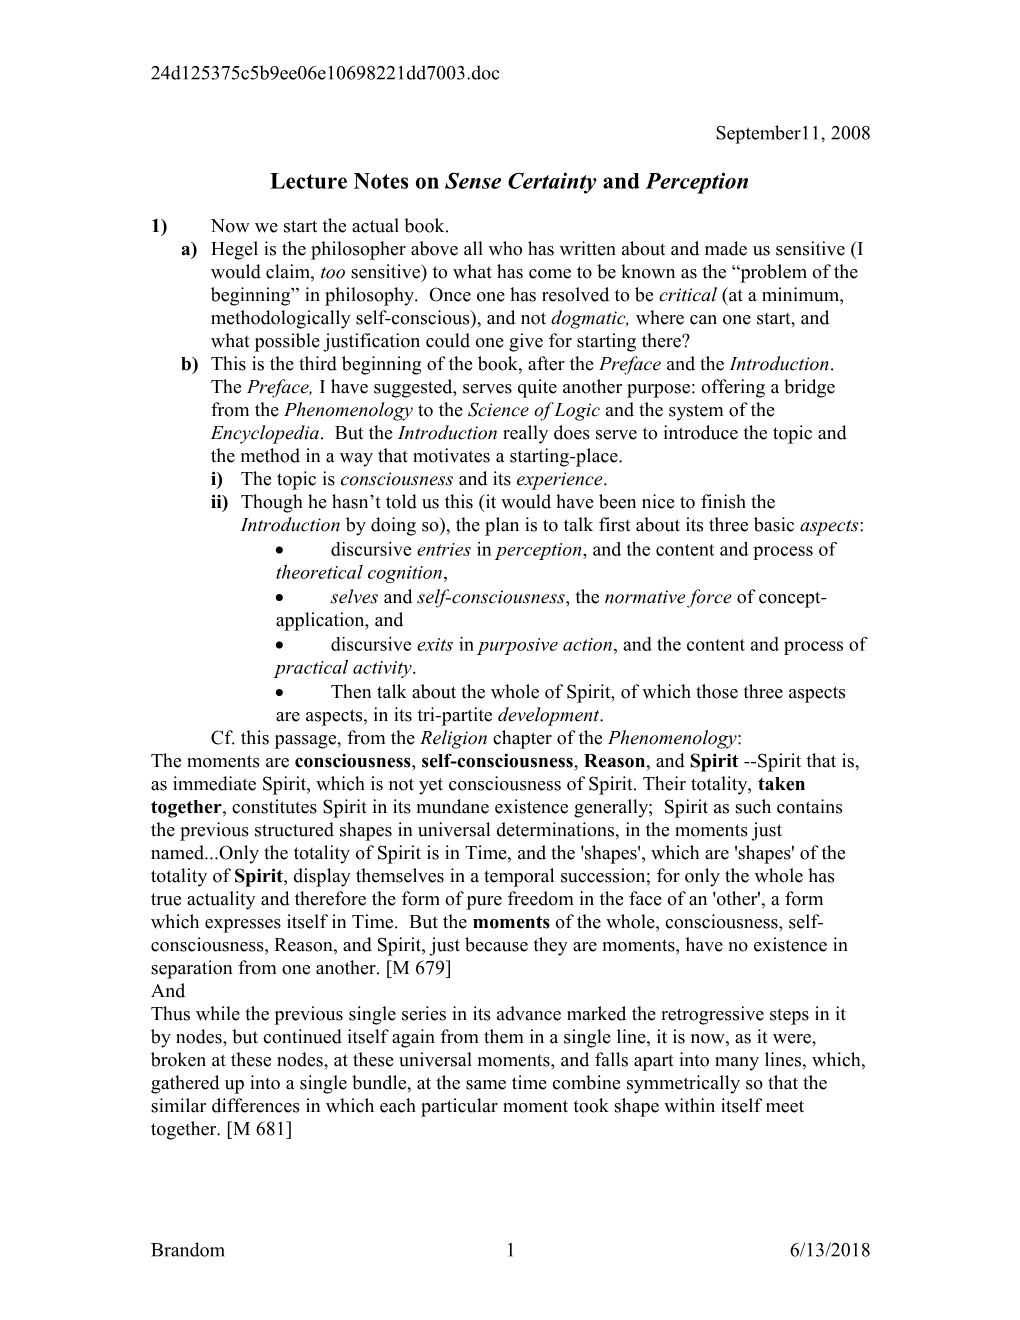 Lecture Notes on Sense Certainty and Perception